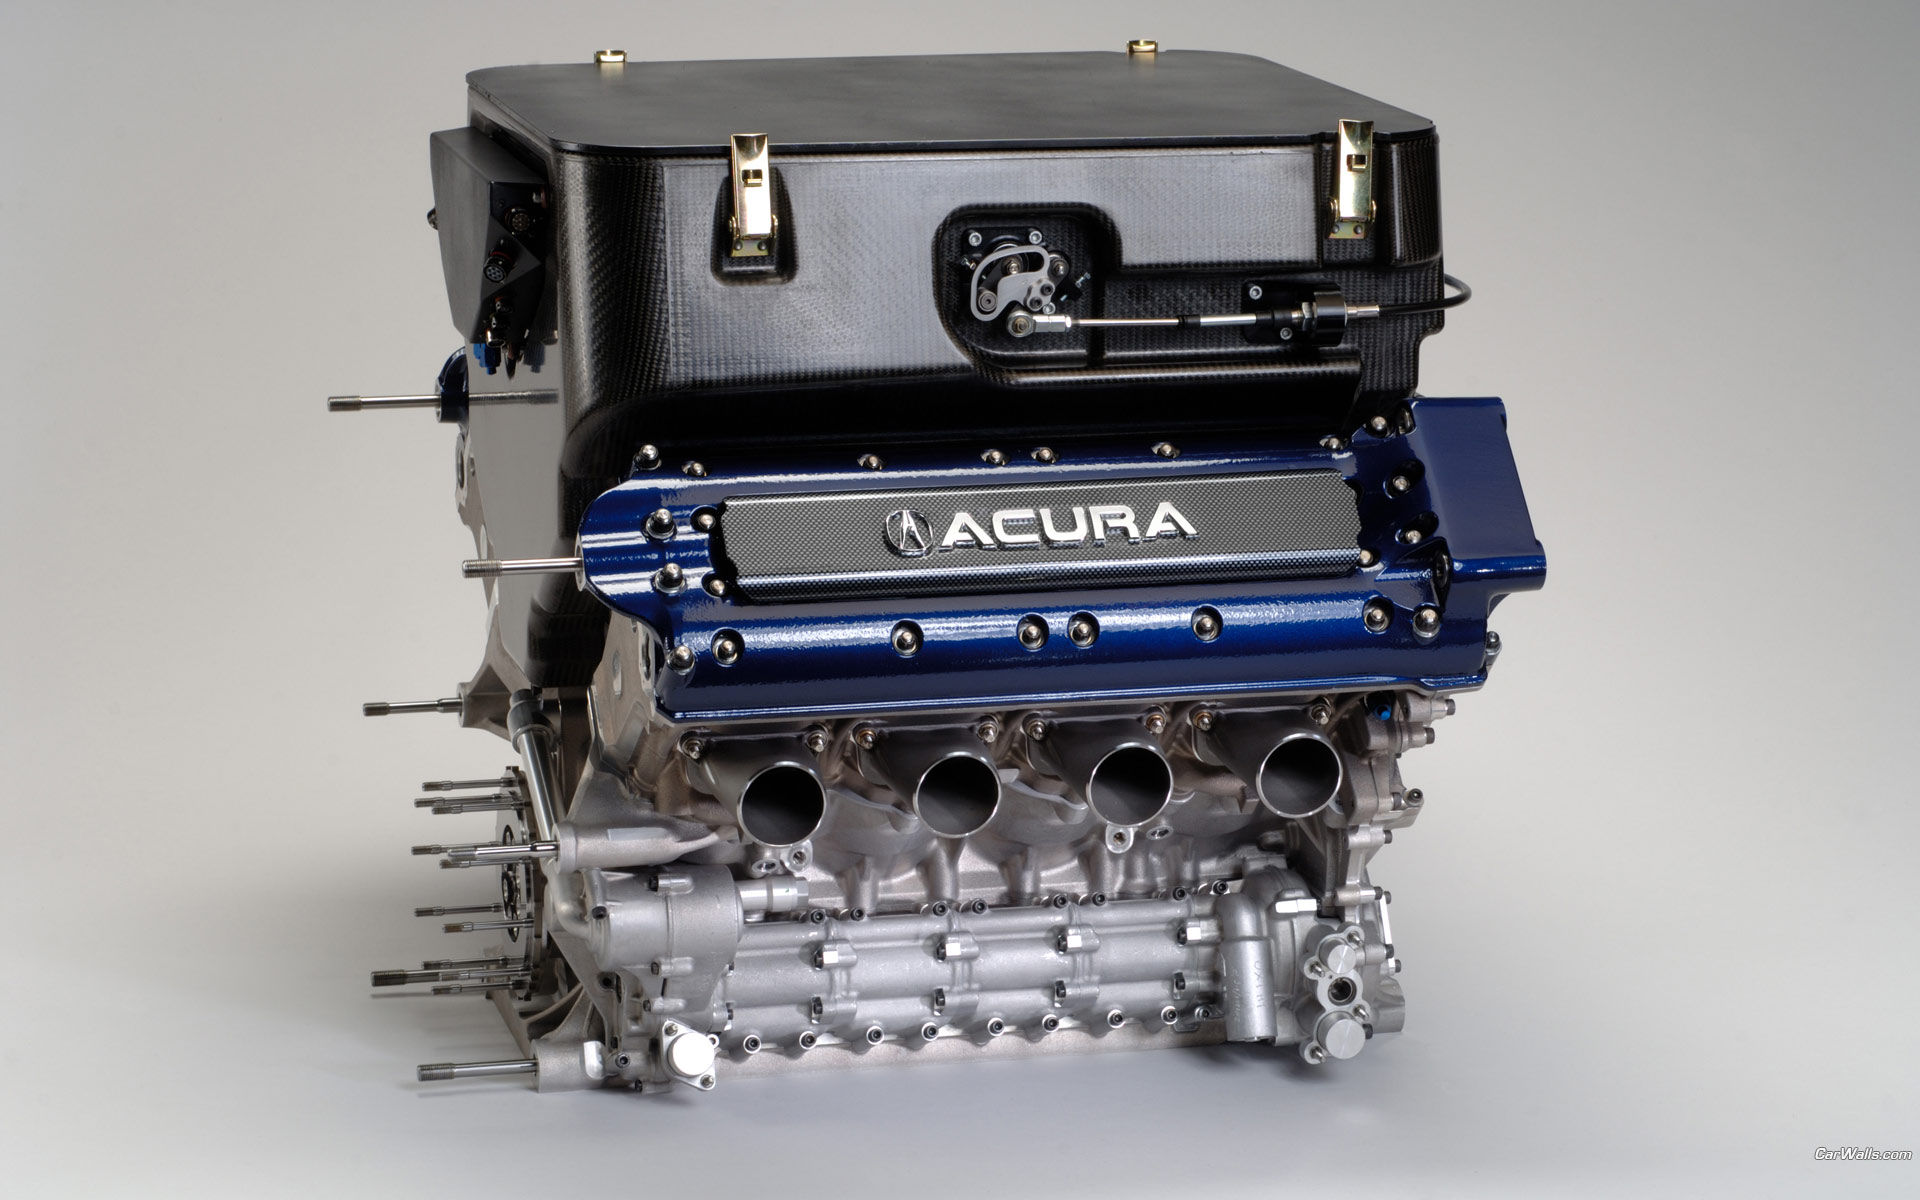 Download full size Acura ALMS engine Acura wallpaper / 1920x1200